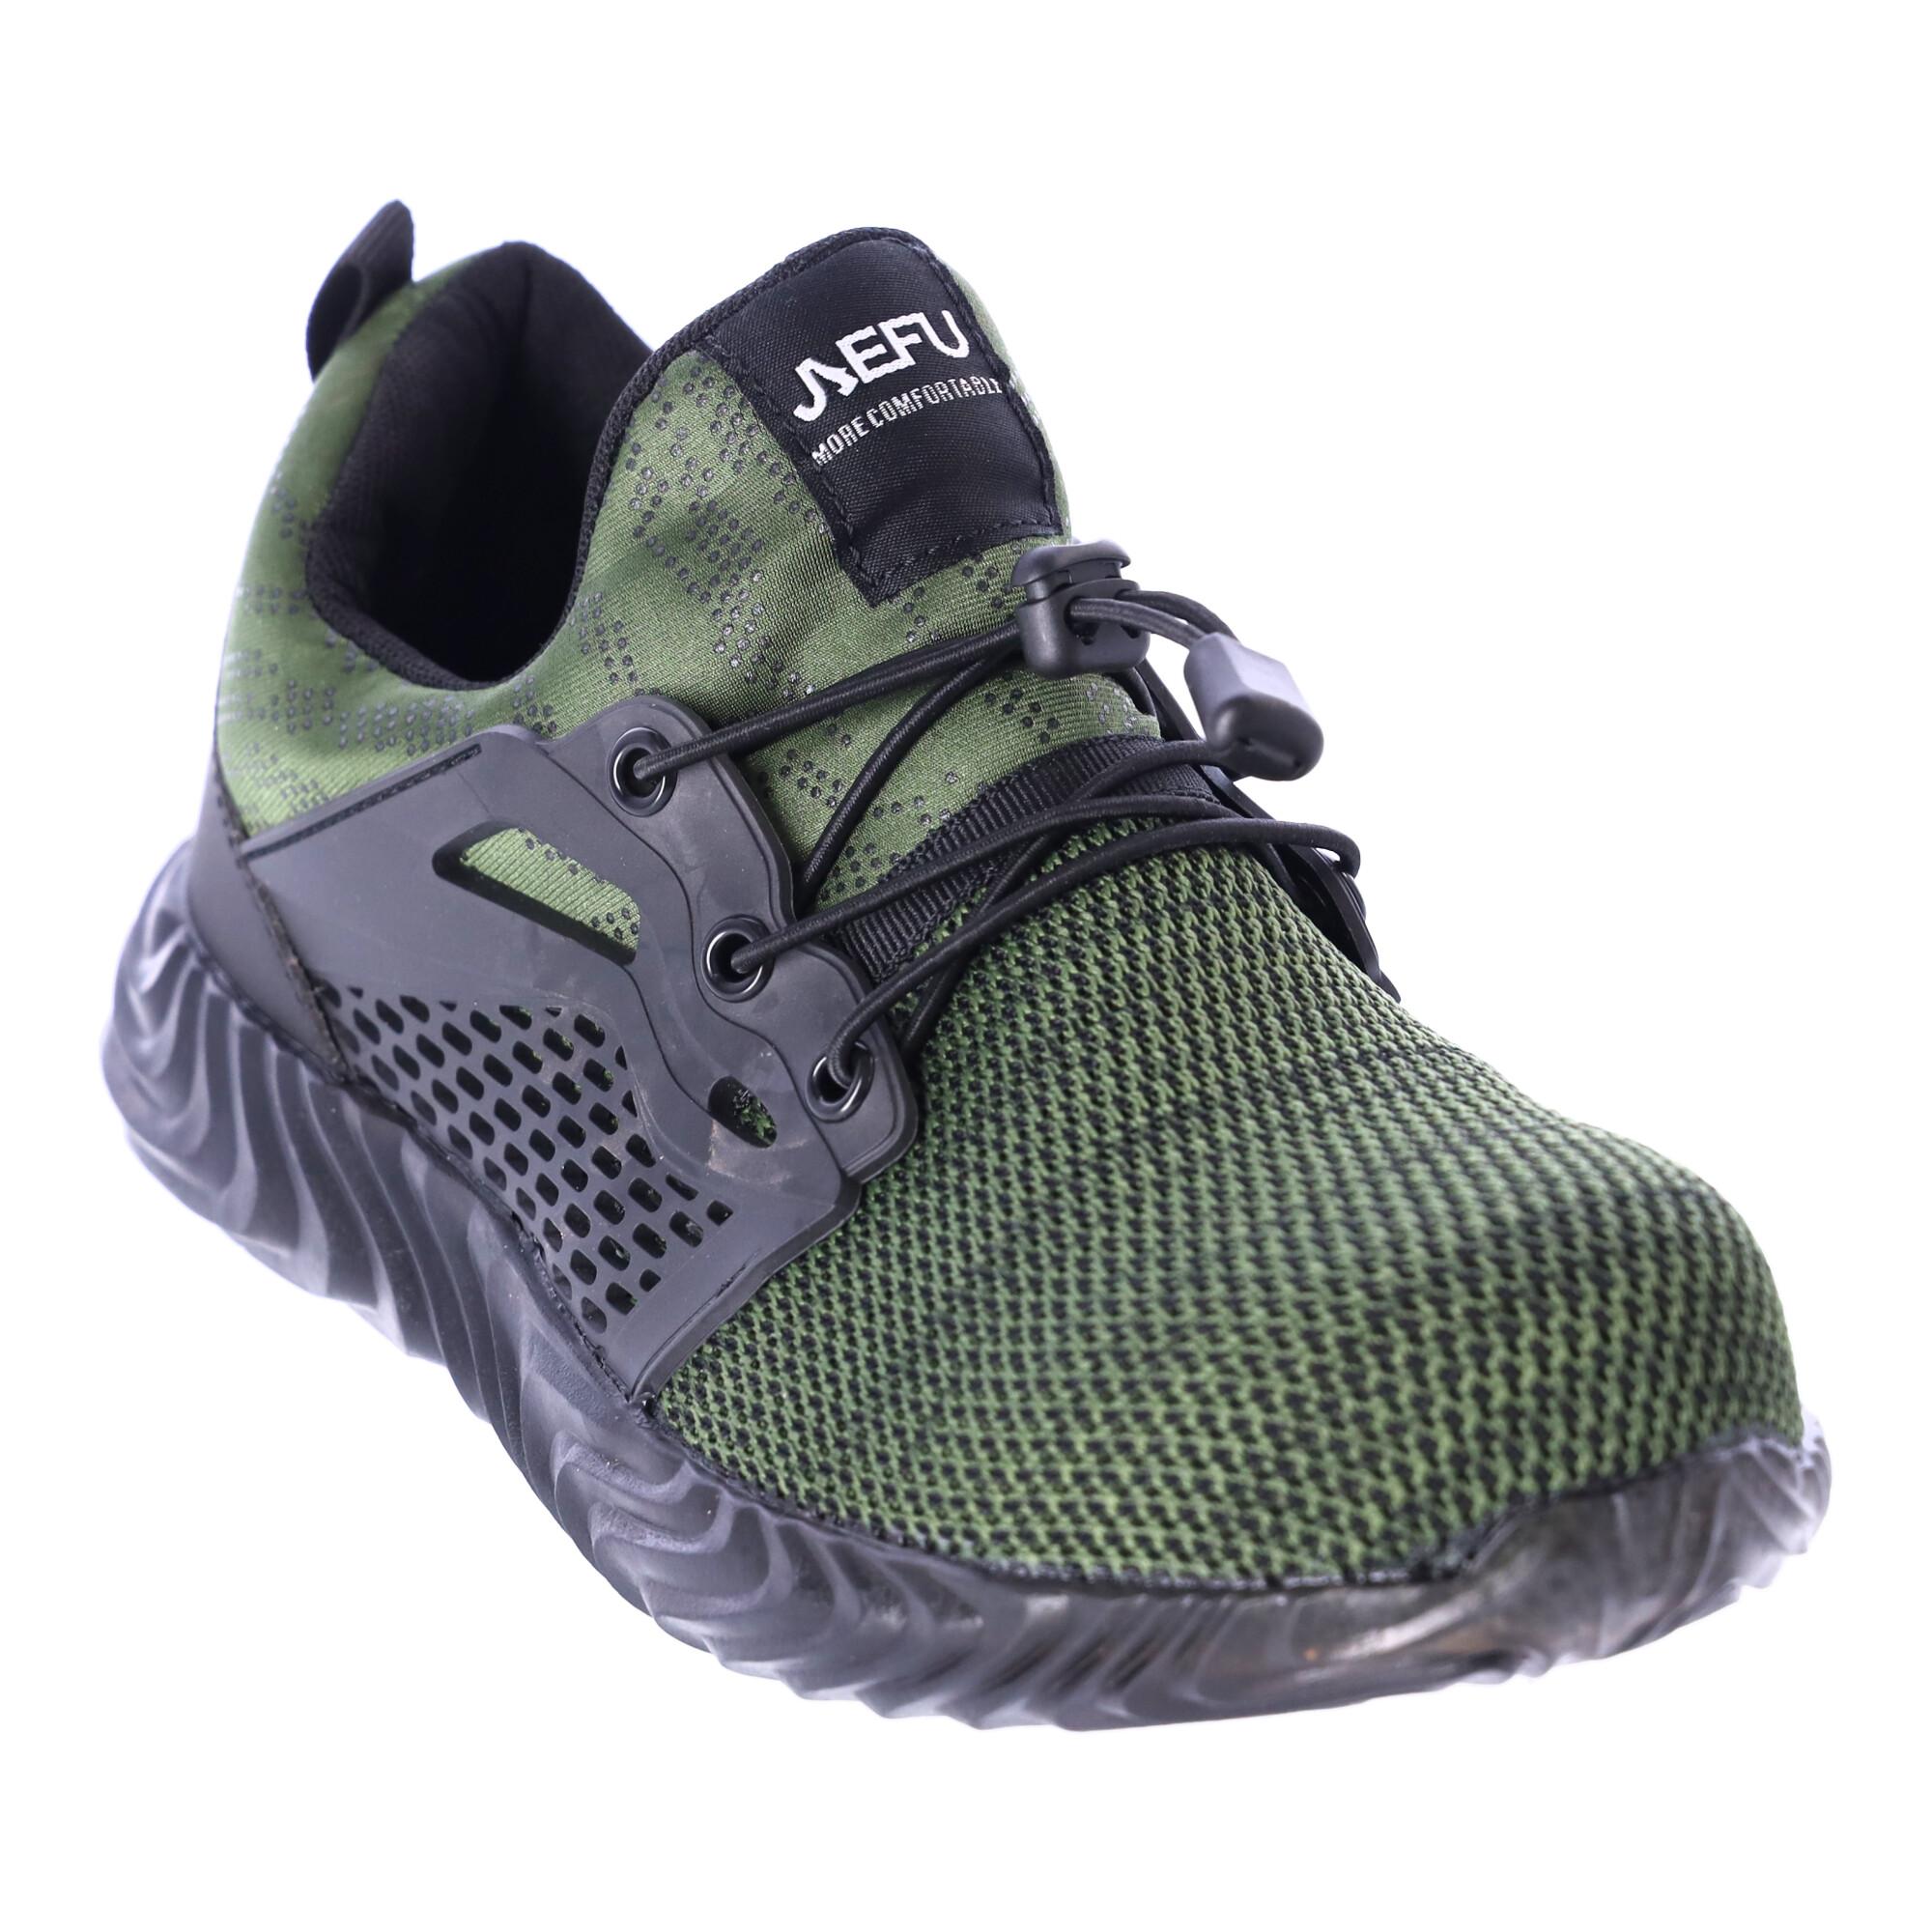 Work safety shoes "41" - green